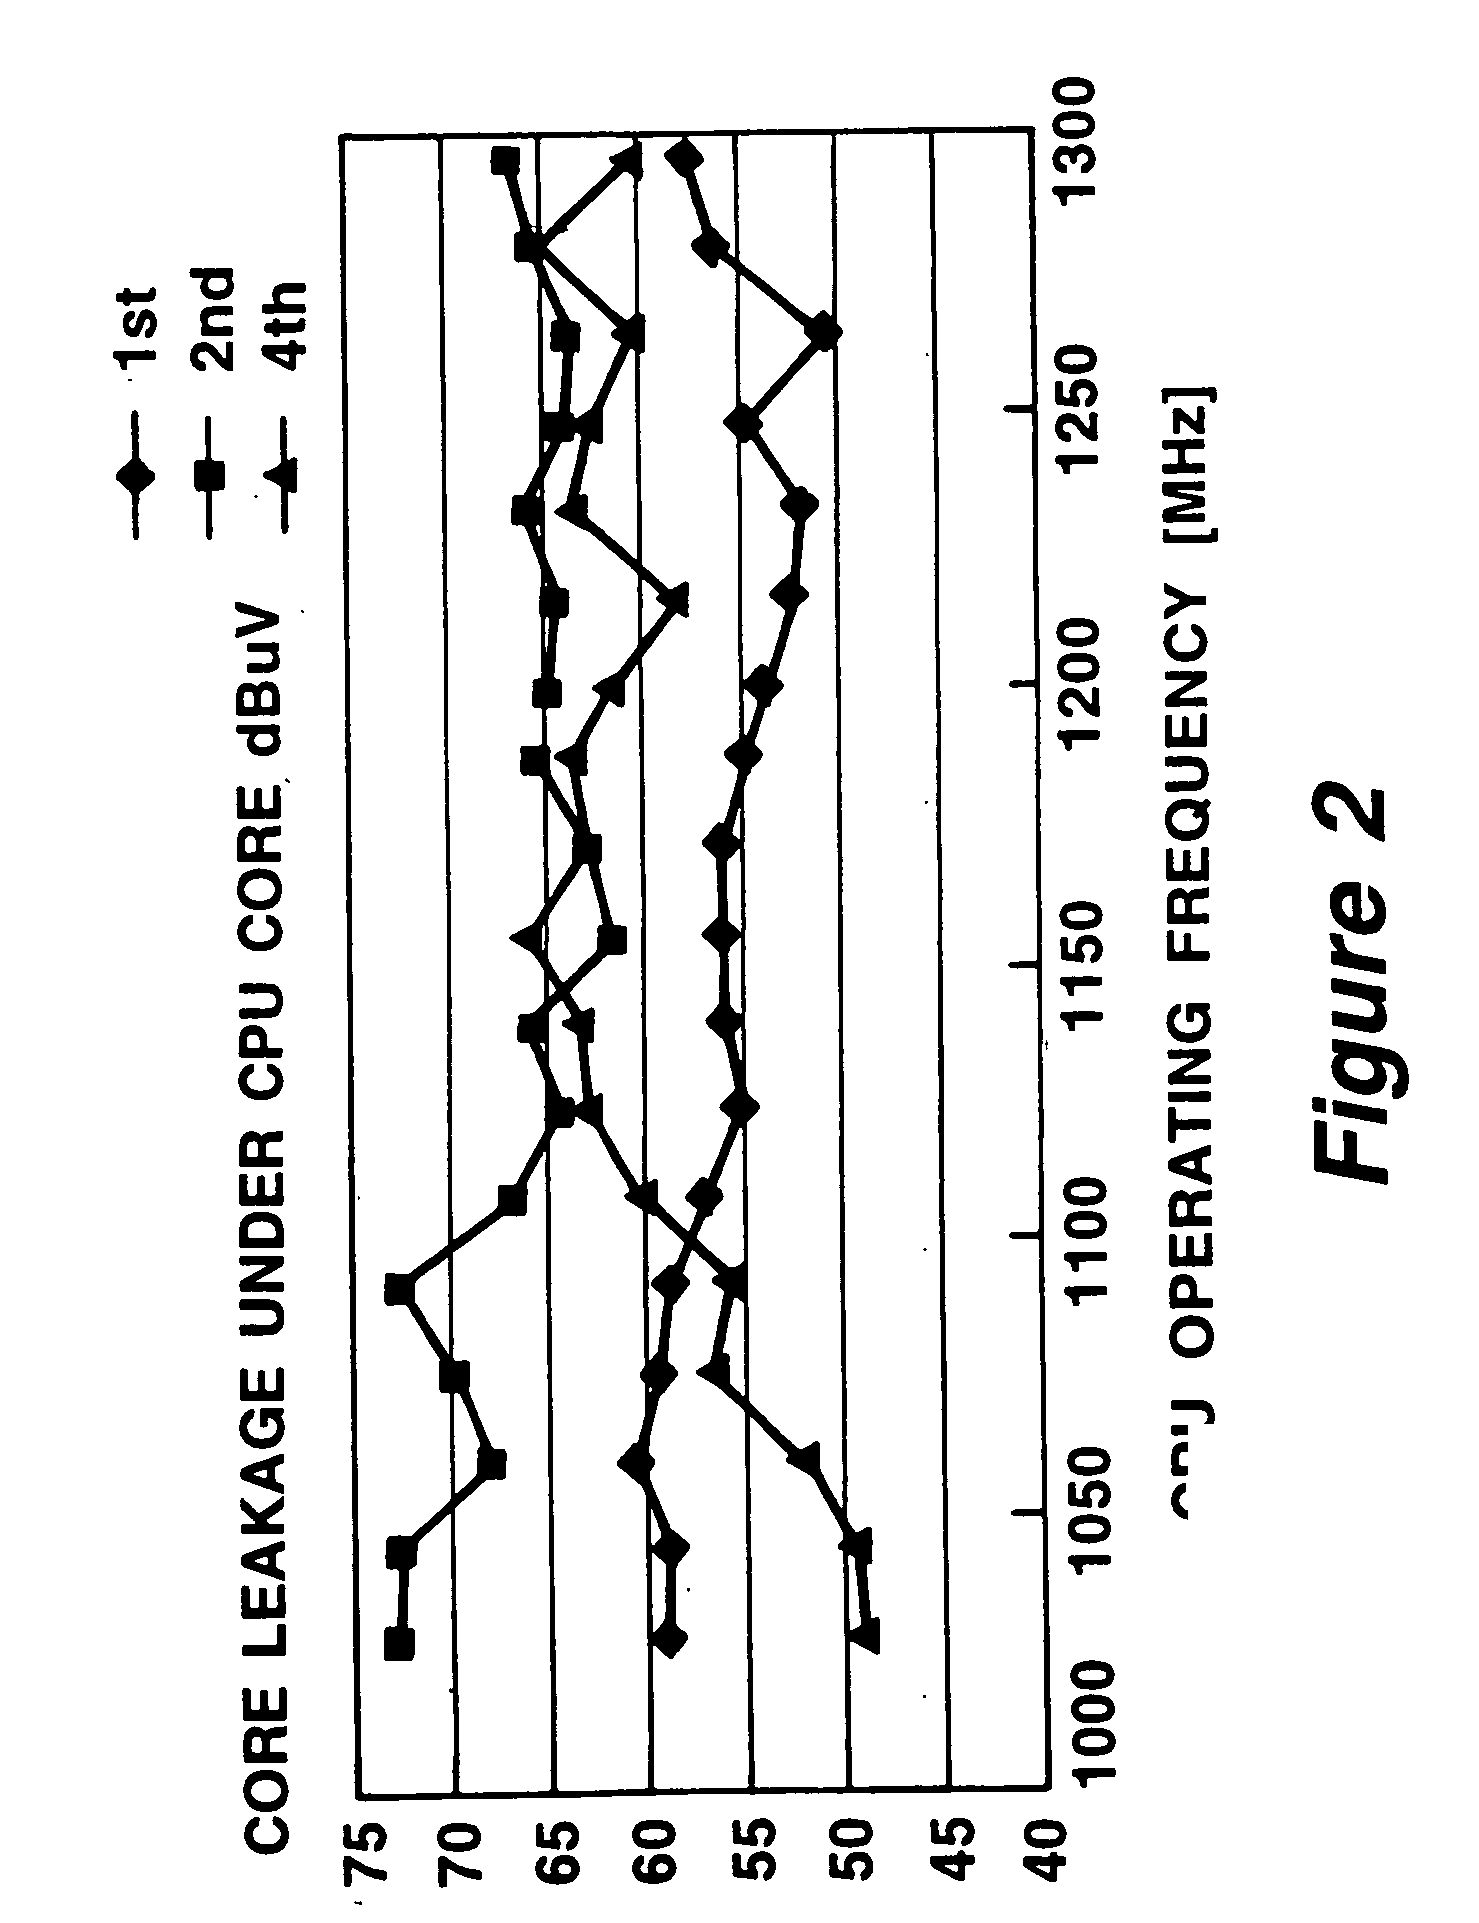 Method and apparatus for reducing capacitively coupled radio frequency energy between a semiconductor device and an adjacent metal structure